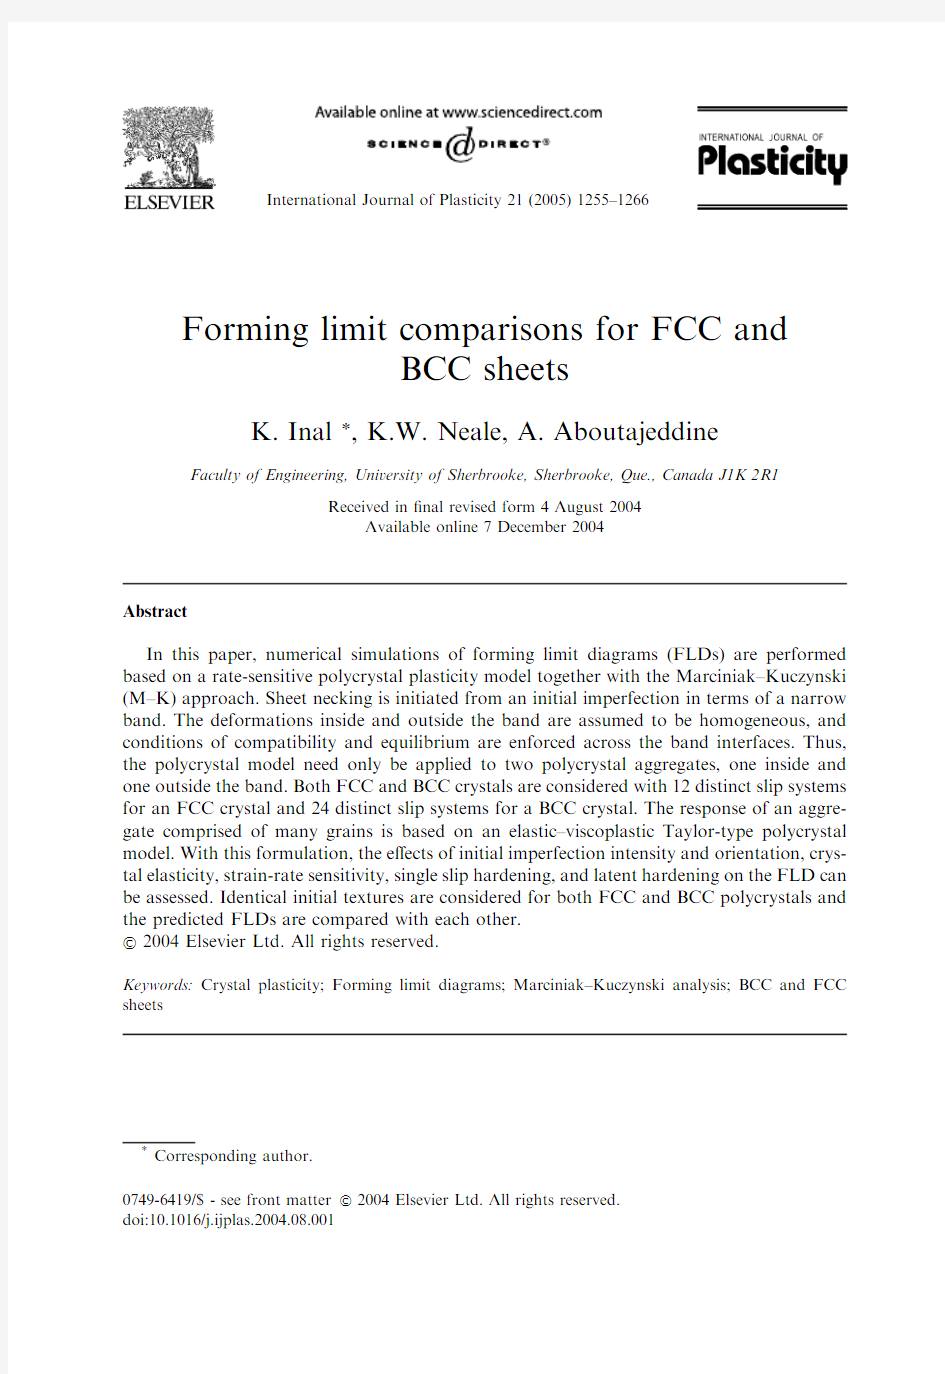 Forming limit comparisons for FCC and BCC sheets